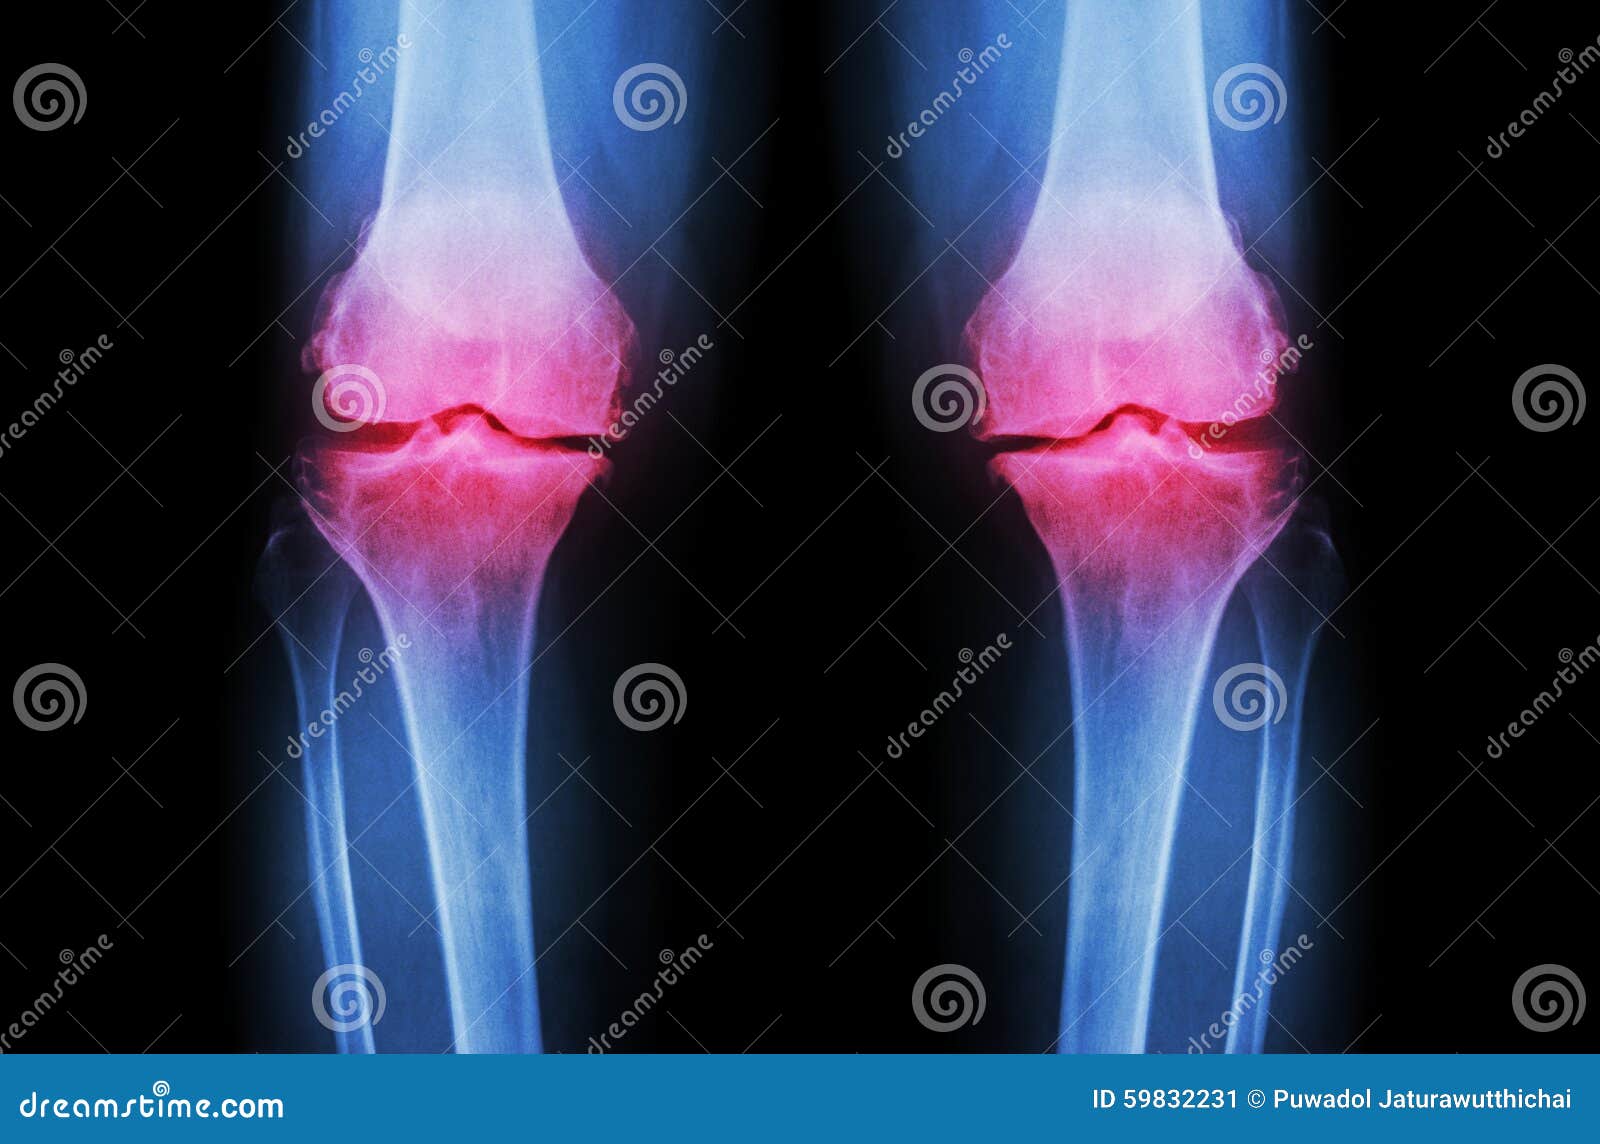 osteoarthritis knee ( oa knee ). film x-ray both knee ( front view ) show narrow joint space ( joint cartilage loss ) , osteophyte